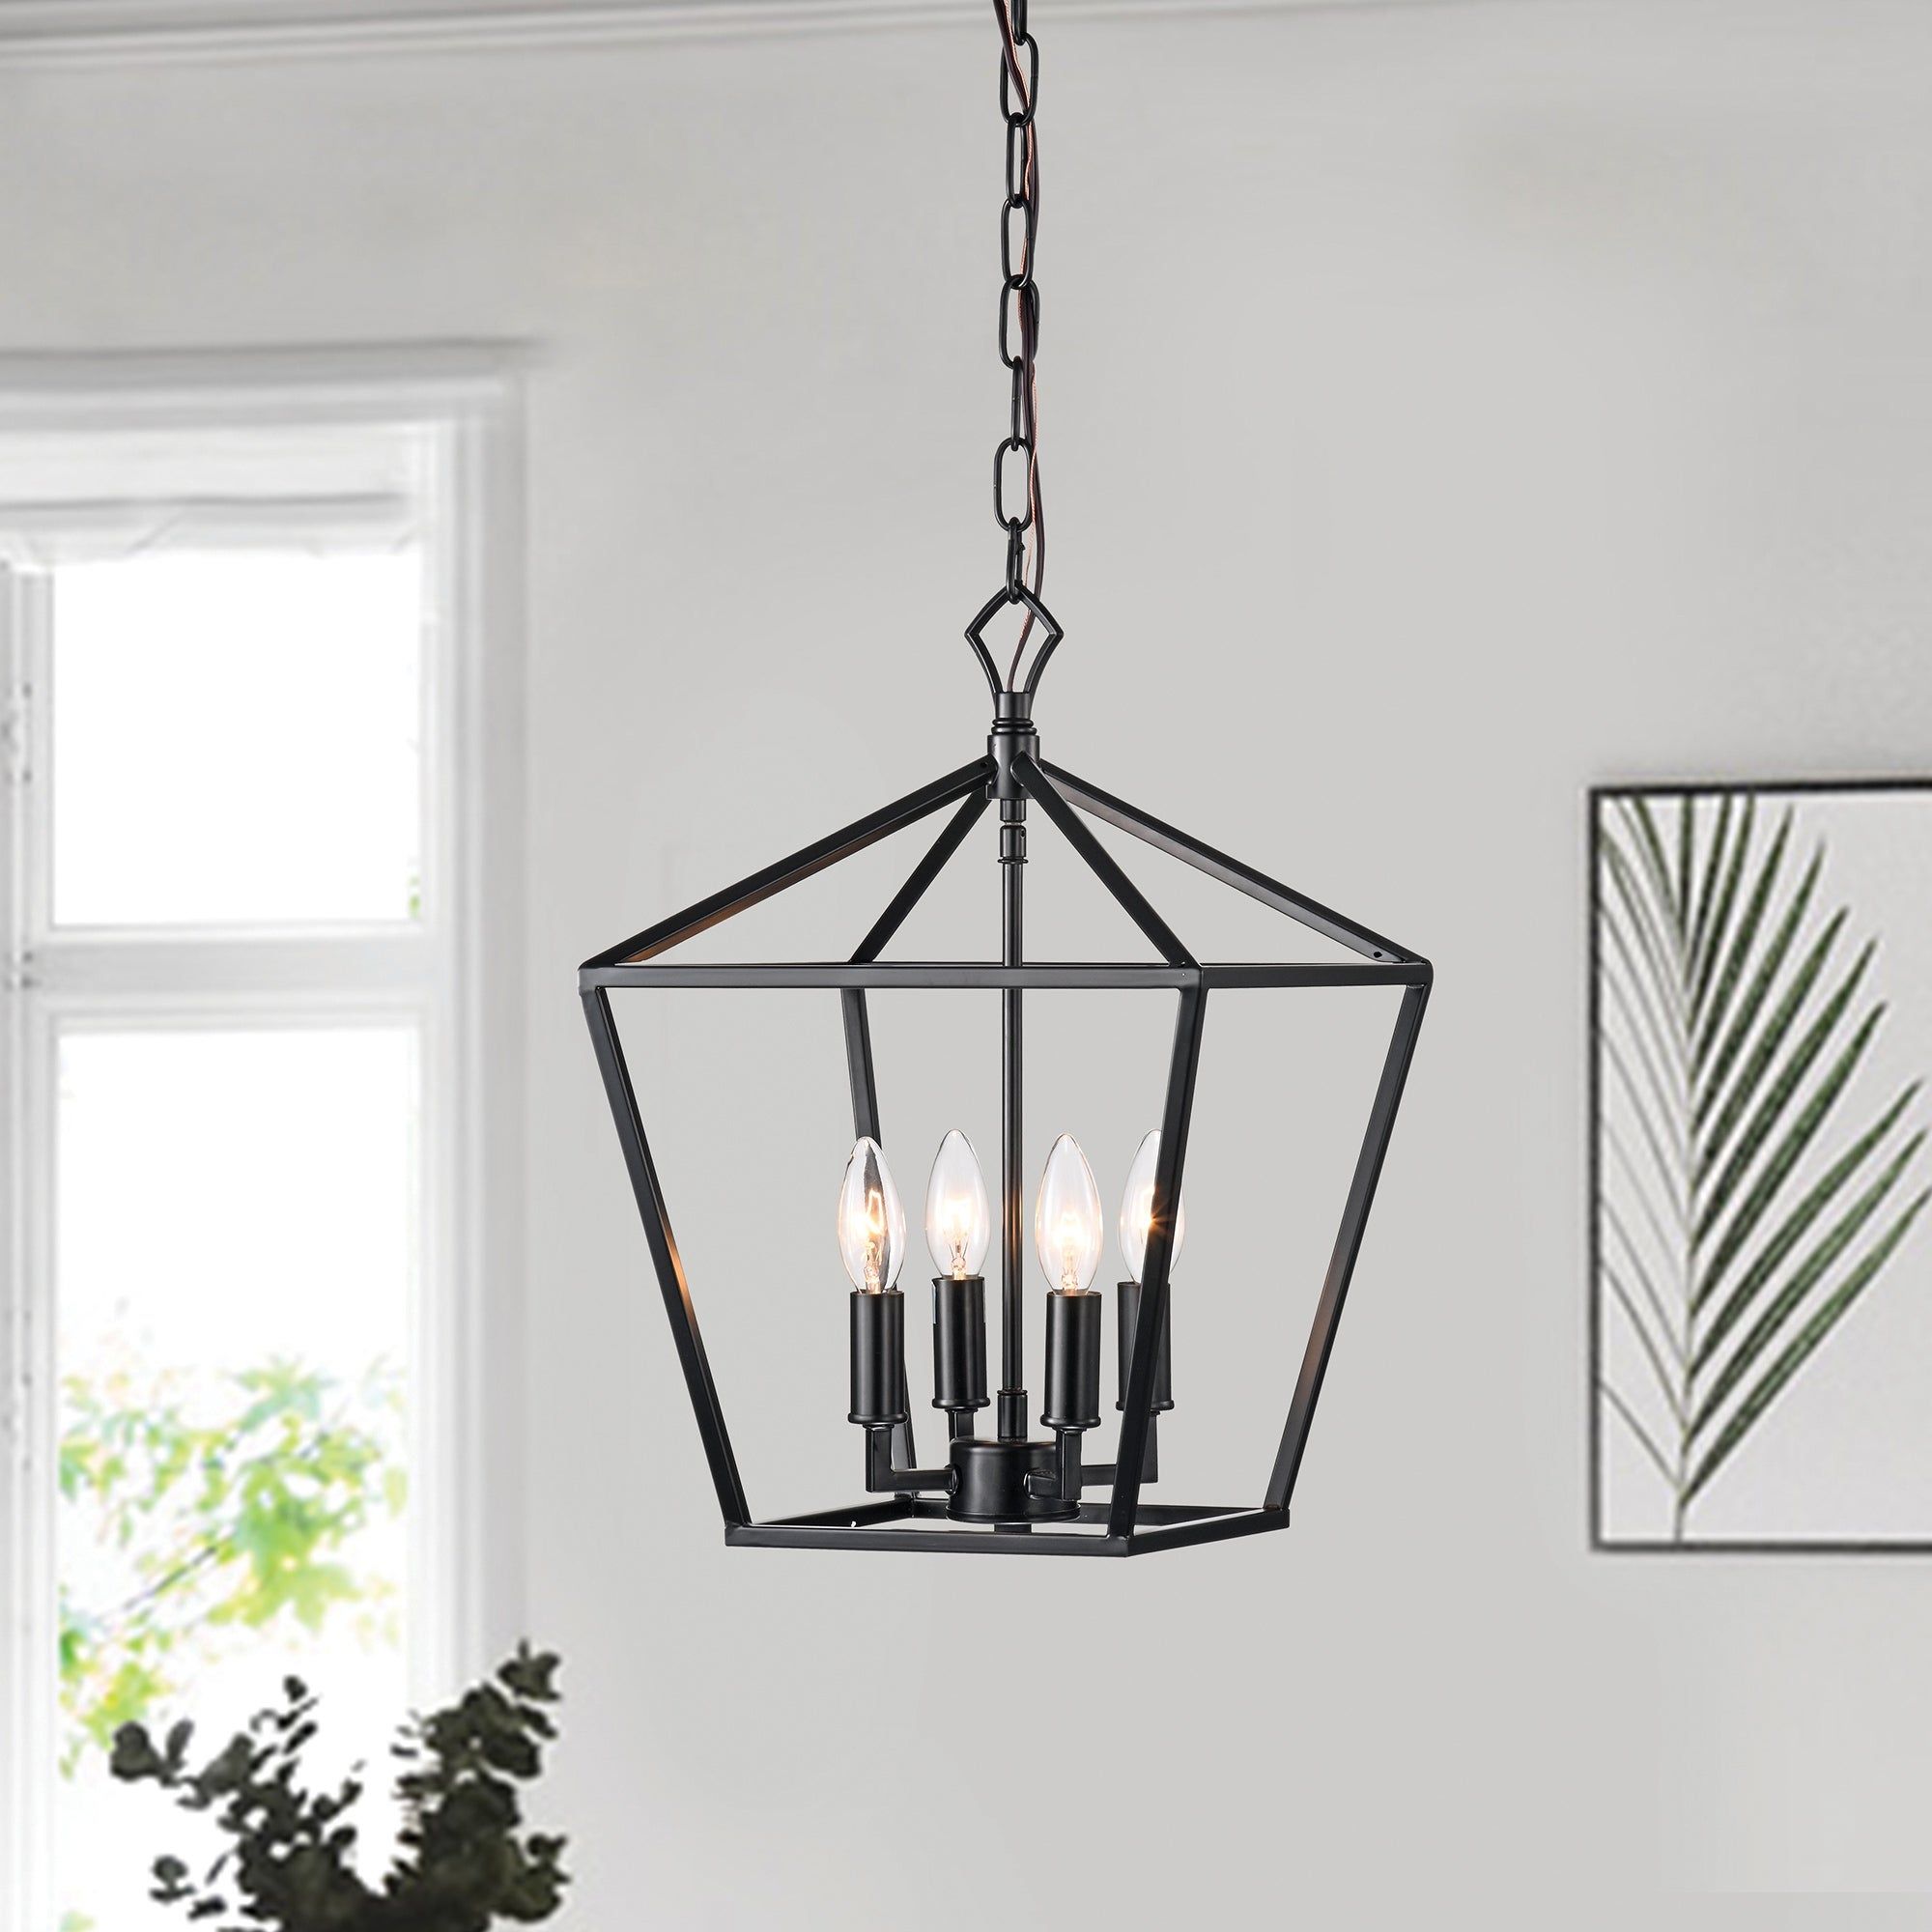 Matte Black 4 Light Lantern Pendant 12 In With Nickel Or Black Sleeve – On  Sale – Overstock – 34157357 Pertaining To 12 Light Lantern Chandeliers (View 10 of 15)